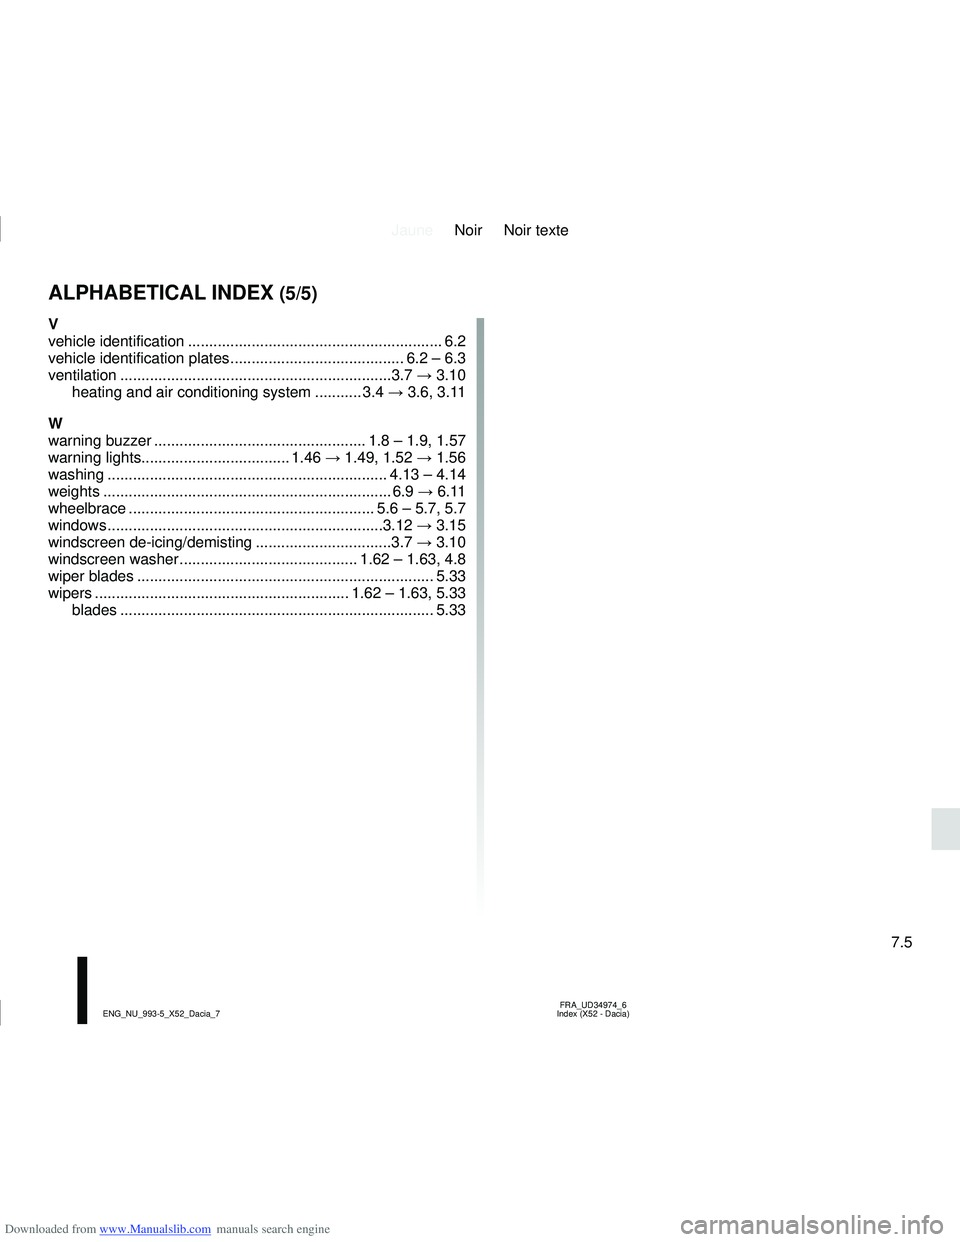 DACIA SANDERO 2021  Owners Manual Downloaded from www.Manualslib.com manuals search engine JauneNoir Noir texte
7.5
FRA_UD34974_6
Index (X52 - Dacia)
ENG_NU_993-5_X52_Dacia_7
ALPHABETICAL INDEX (5/5)
V
vehicle  identification ........